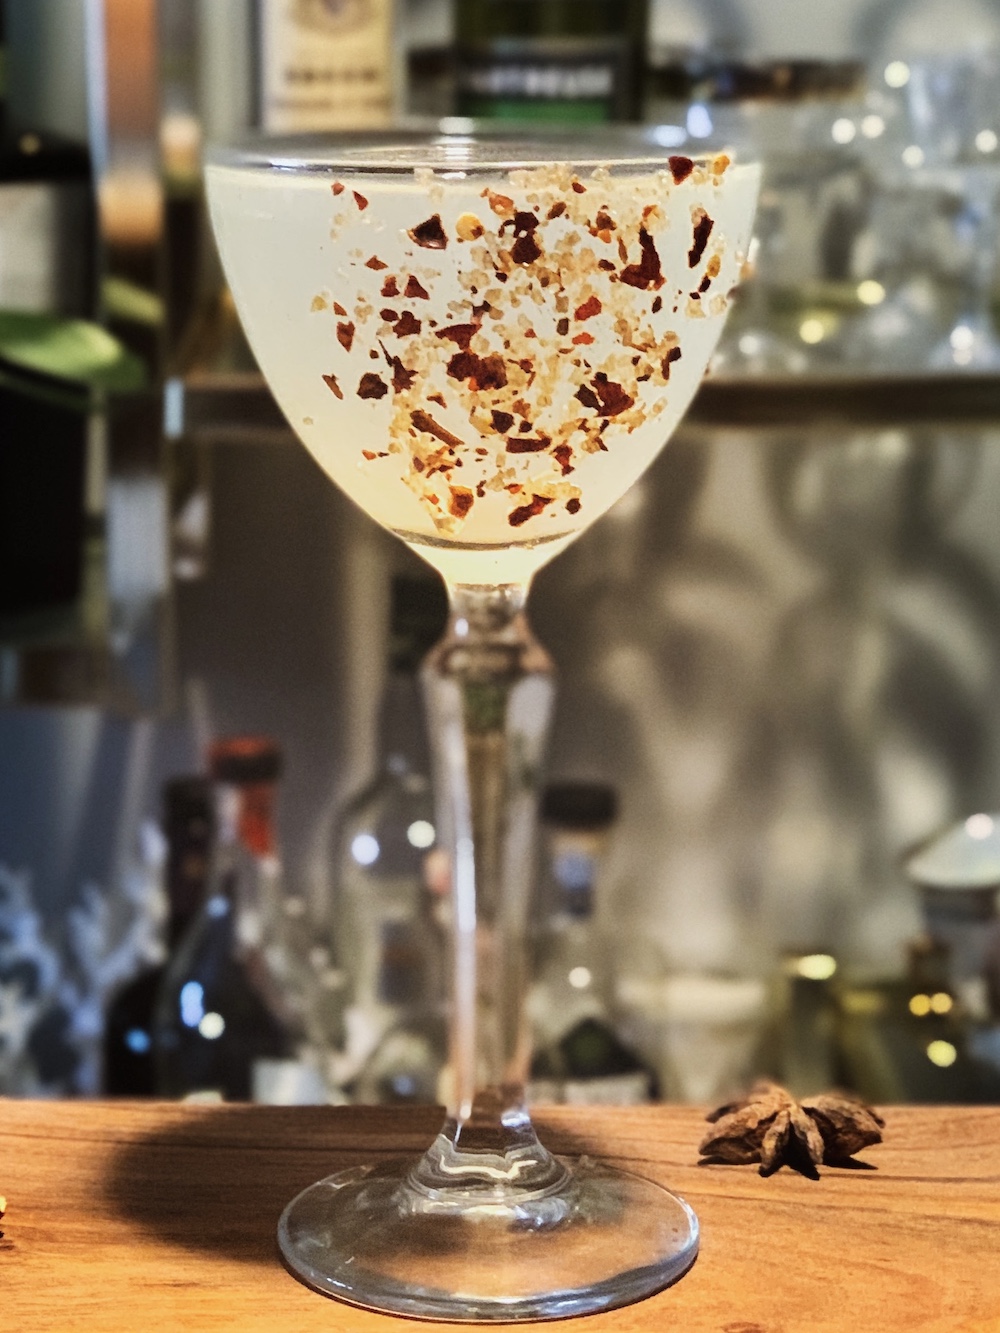 Cocktail with edible Gold 